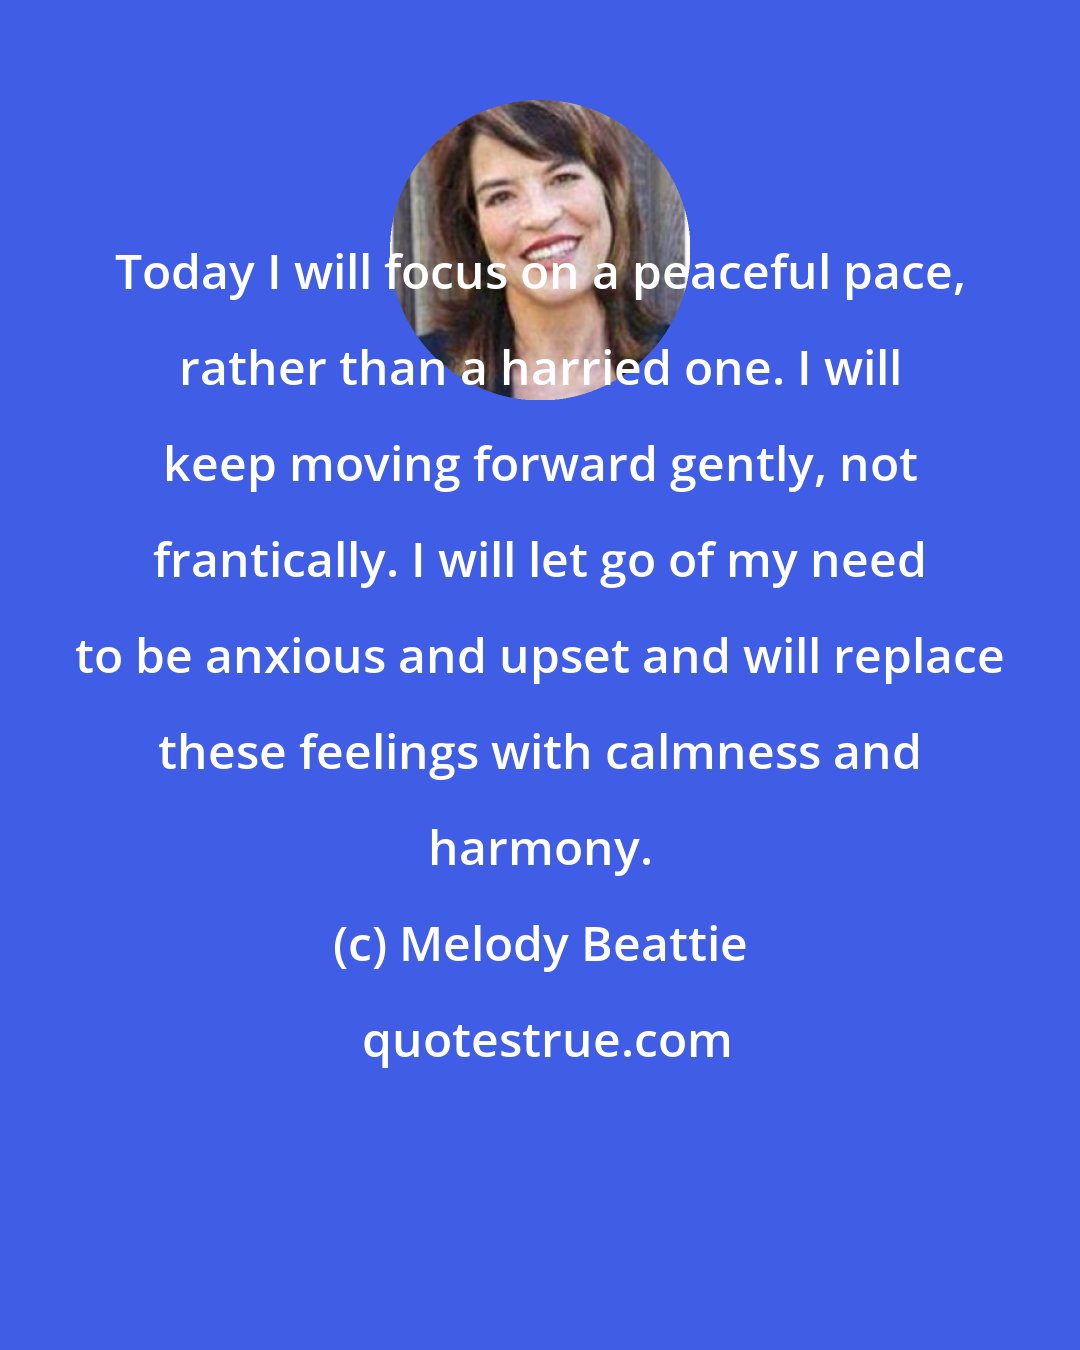 Melody Beattie: Today I will focus on a peaceful pace, rather than a harried one. I will keep moving forward gently, not frantically. I will let go of my need to be anxious and upset and will replace these feelings with calmness and harmony.